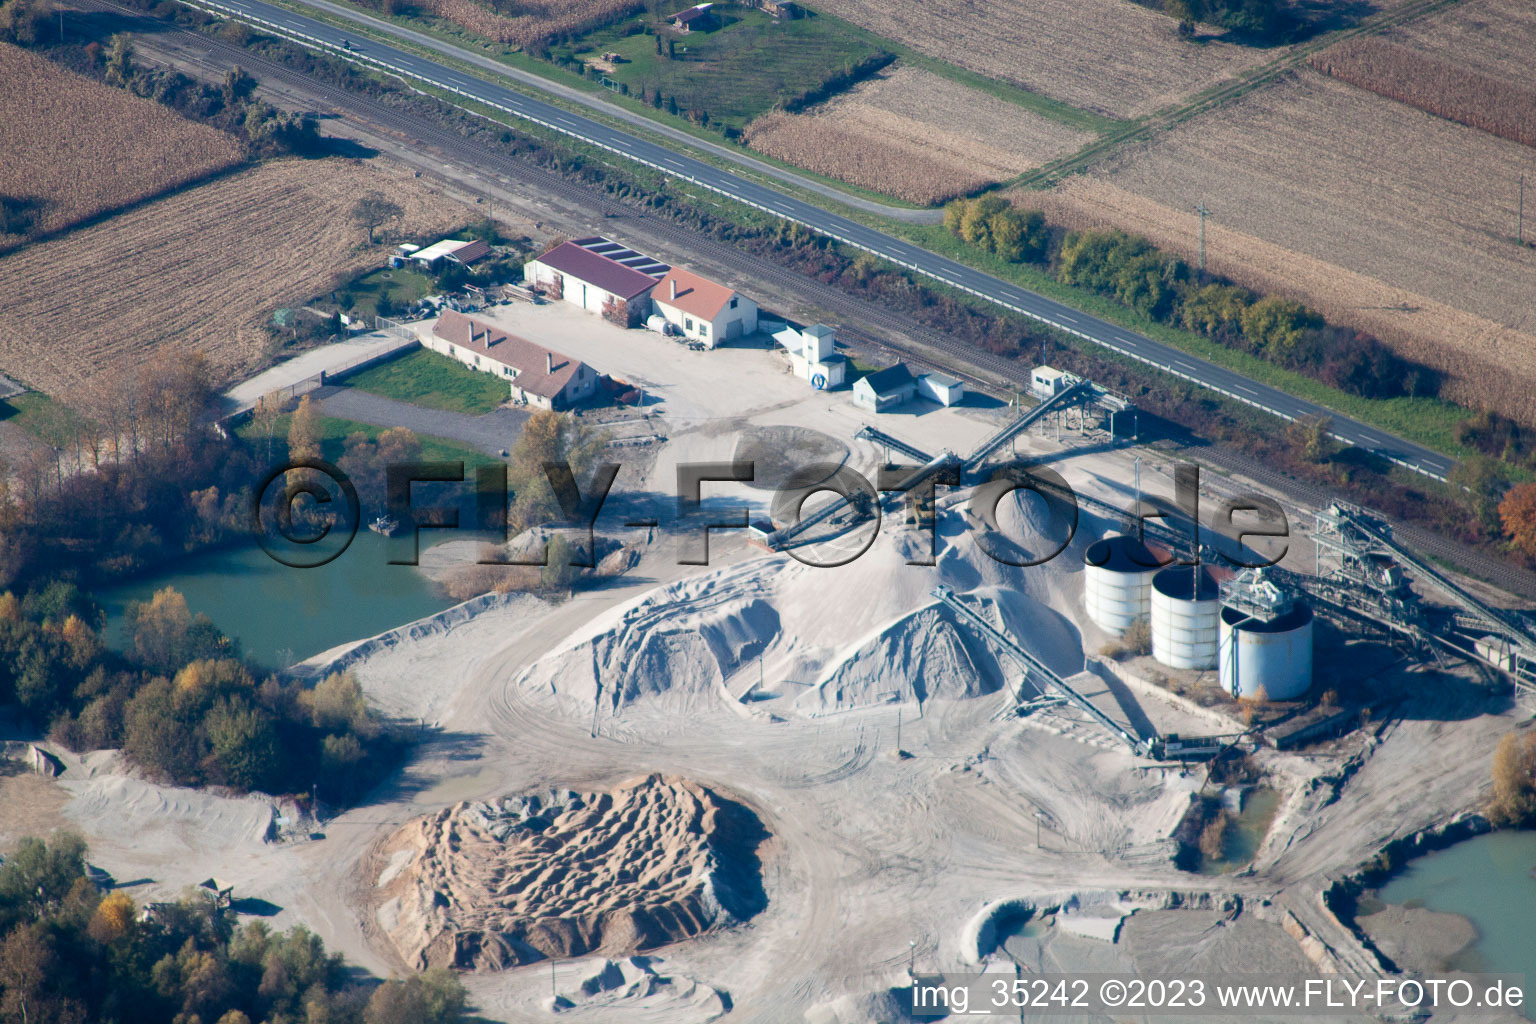 Aerial view of Gravel works in Hagenbach in the state Rhineland-Palatinate, Germany